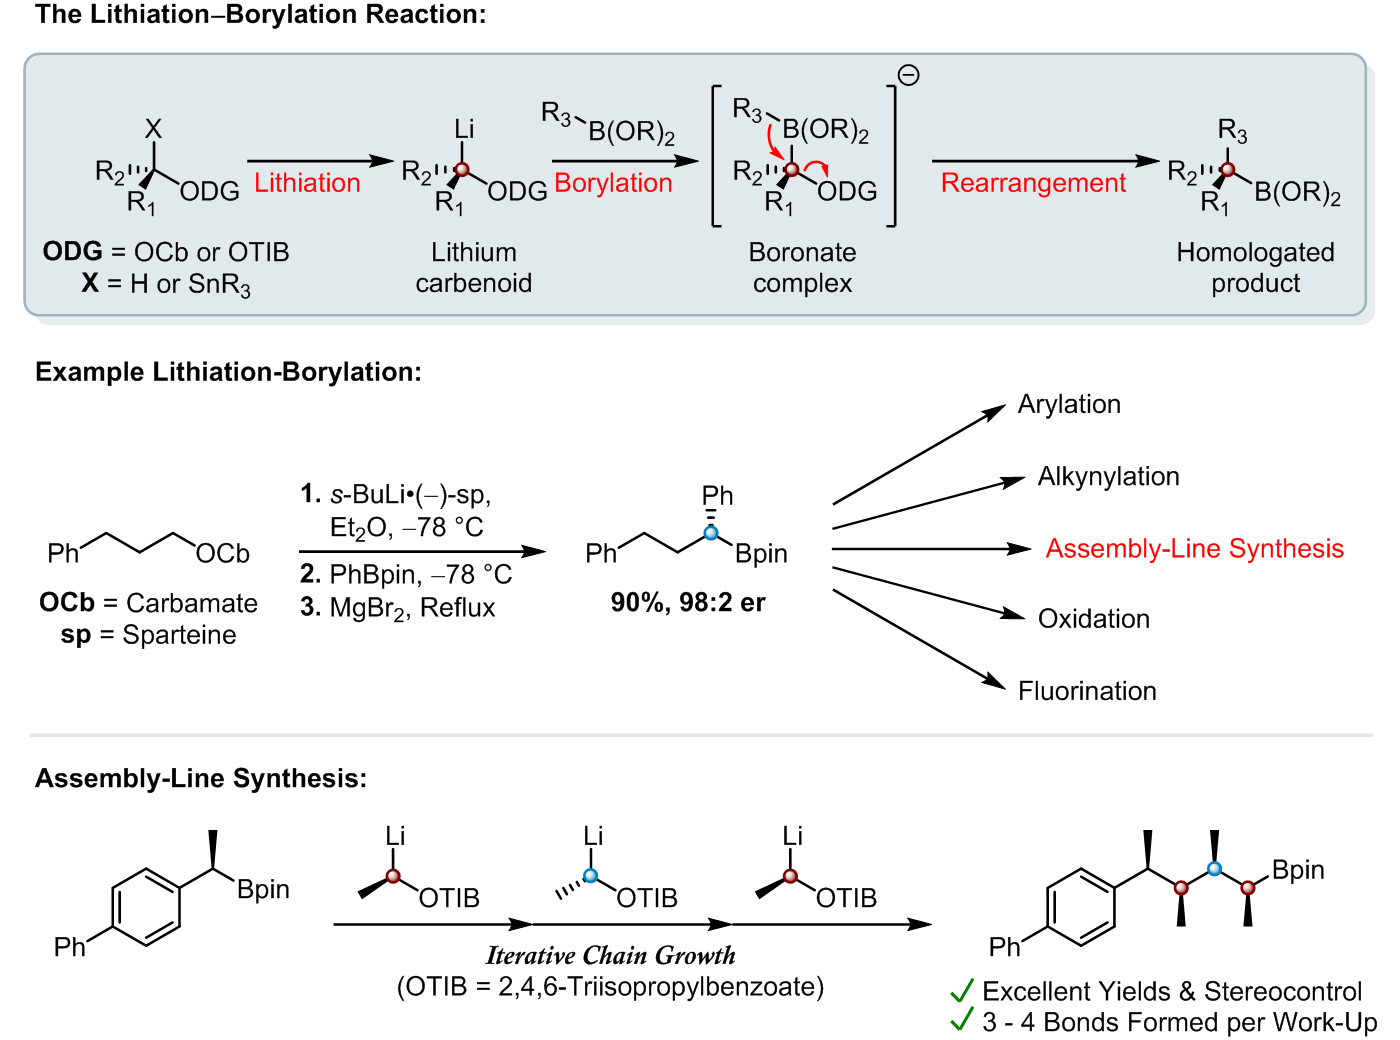 Lithiation-Borylation and Assembly-Line Synthesis